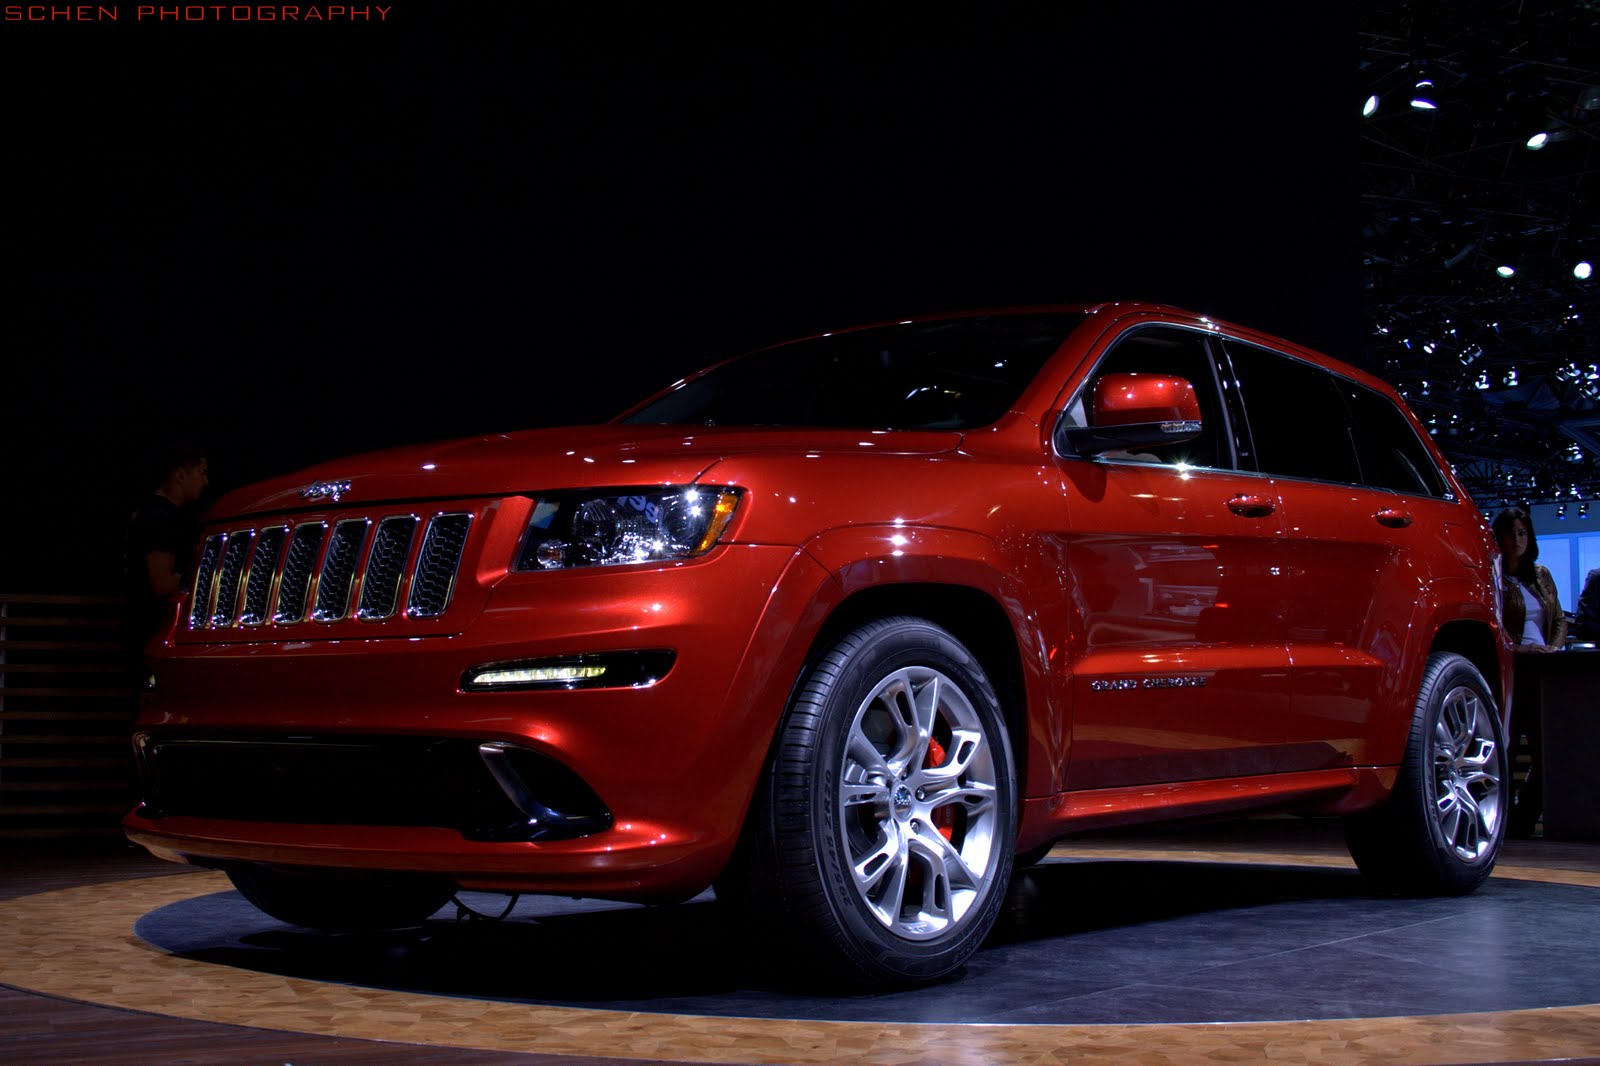 Jeep Grand Cherokee Srt8 Re Car And Wallpaper